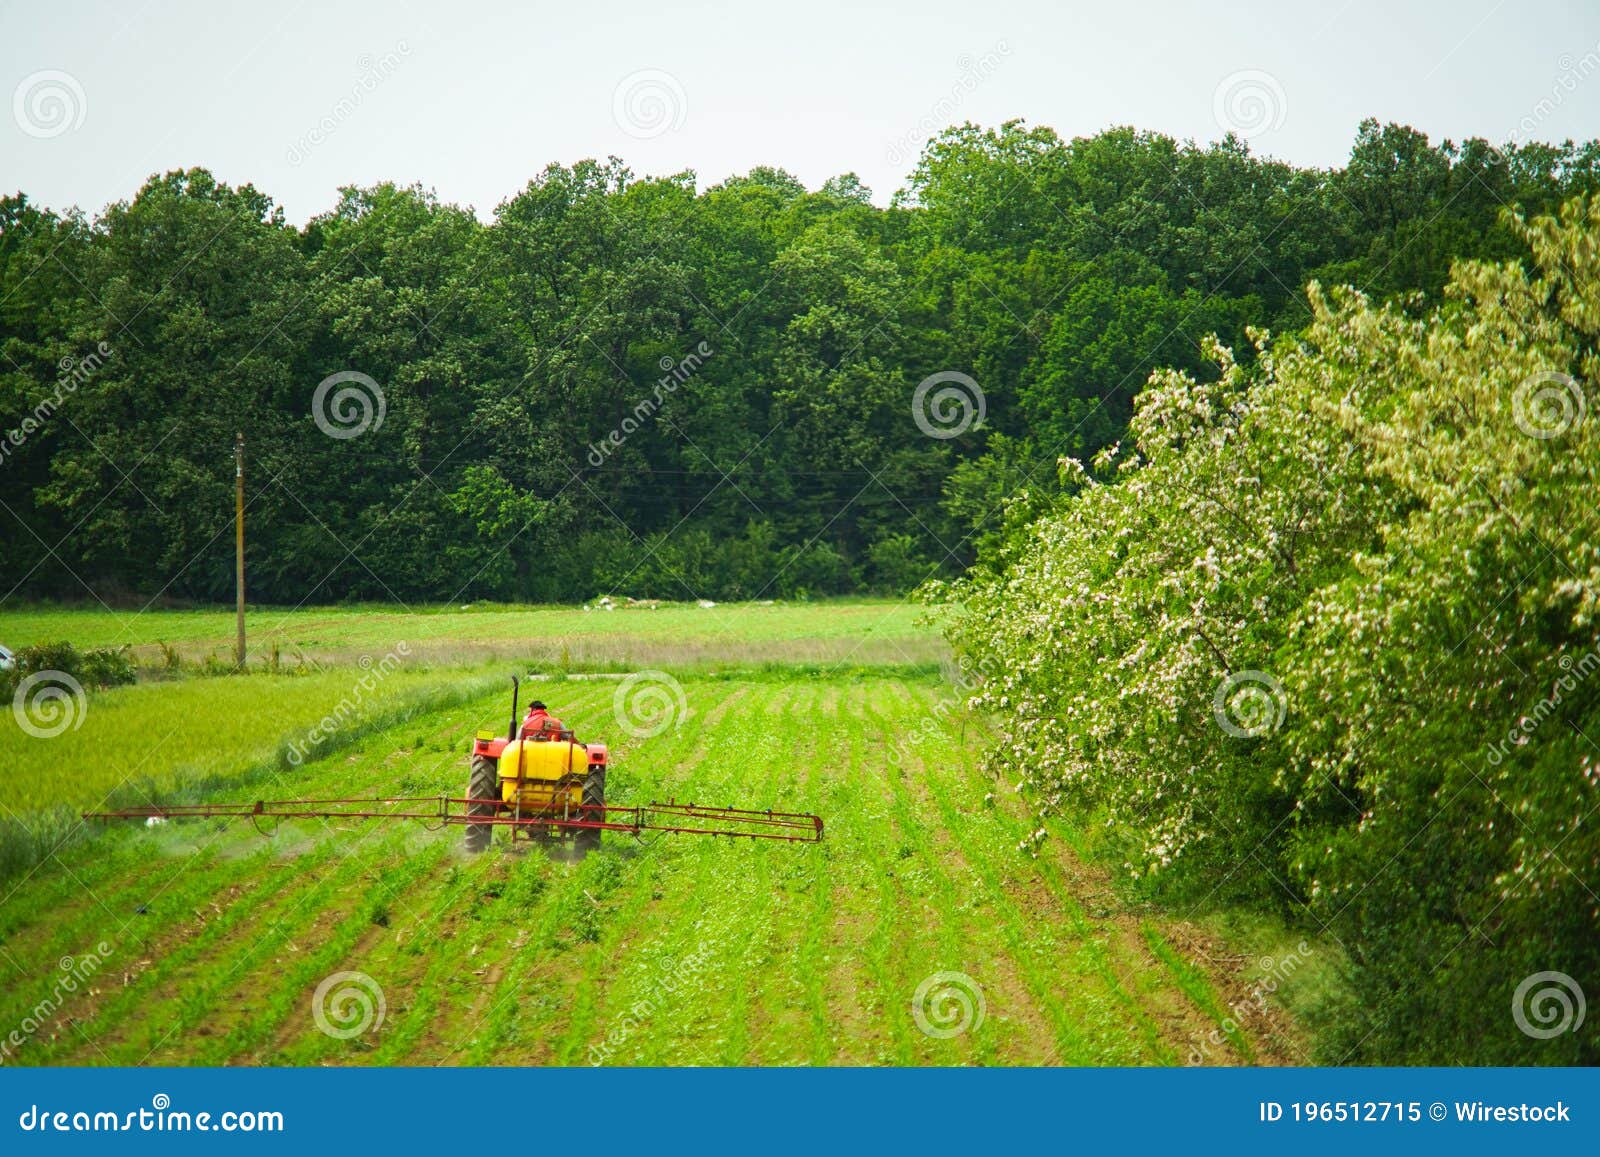 a peasant with a tractor, working a cornfield crop